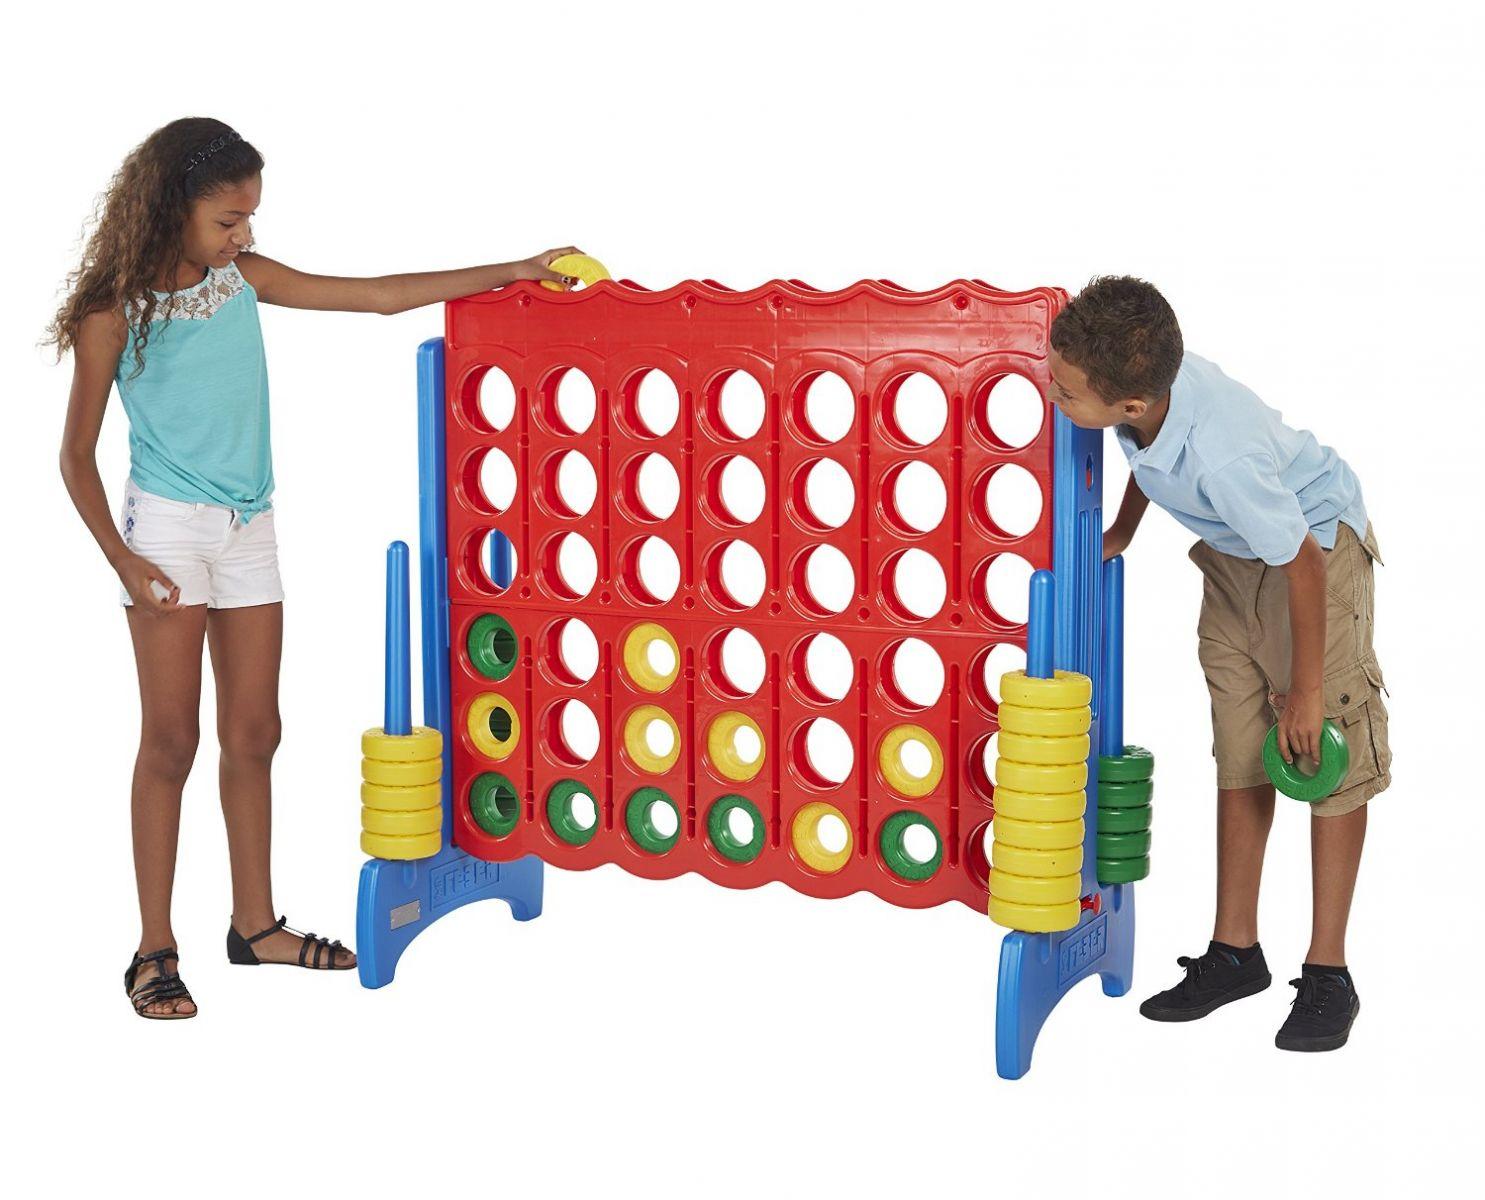 Giant Connect 4 Carnival Game Rental in Chicago